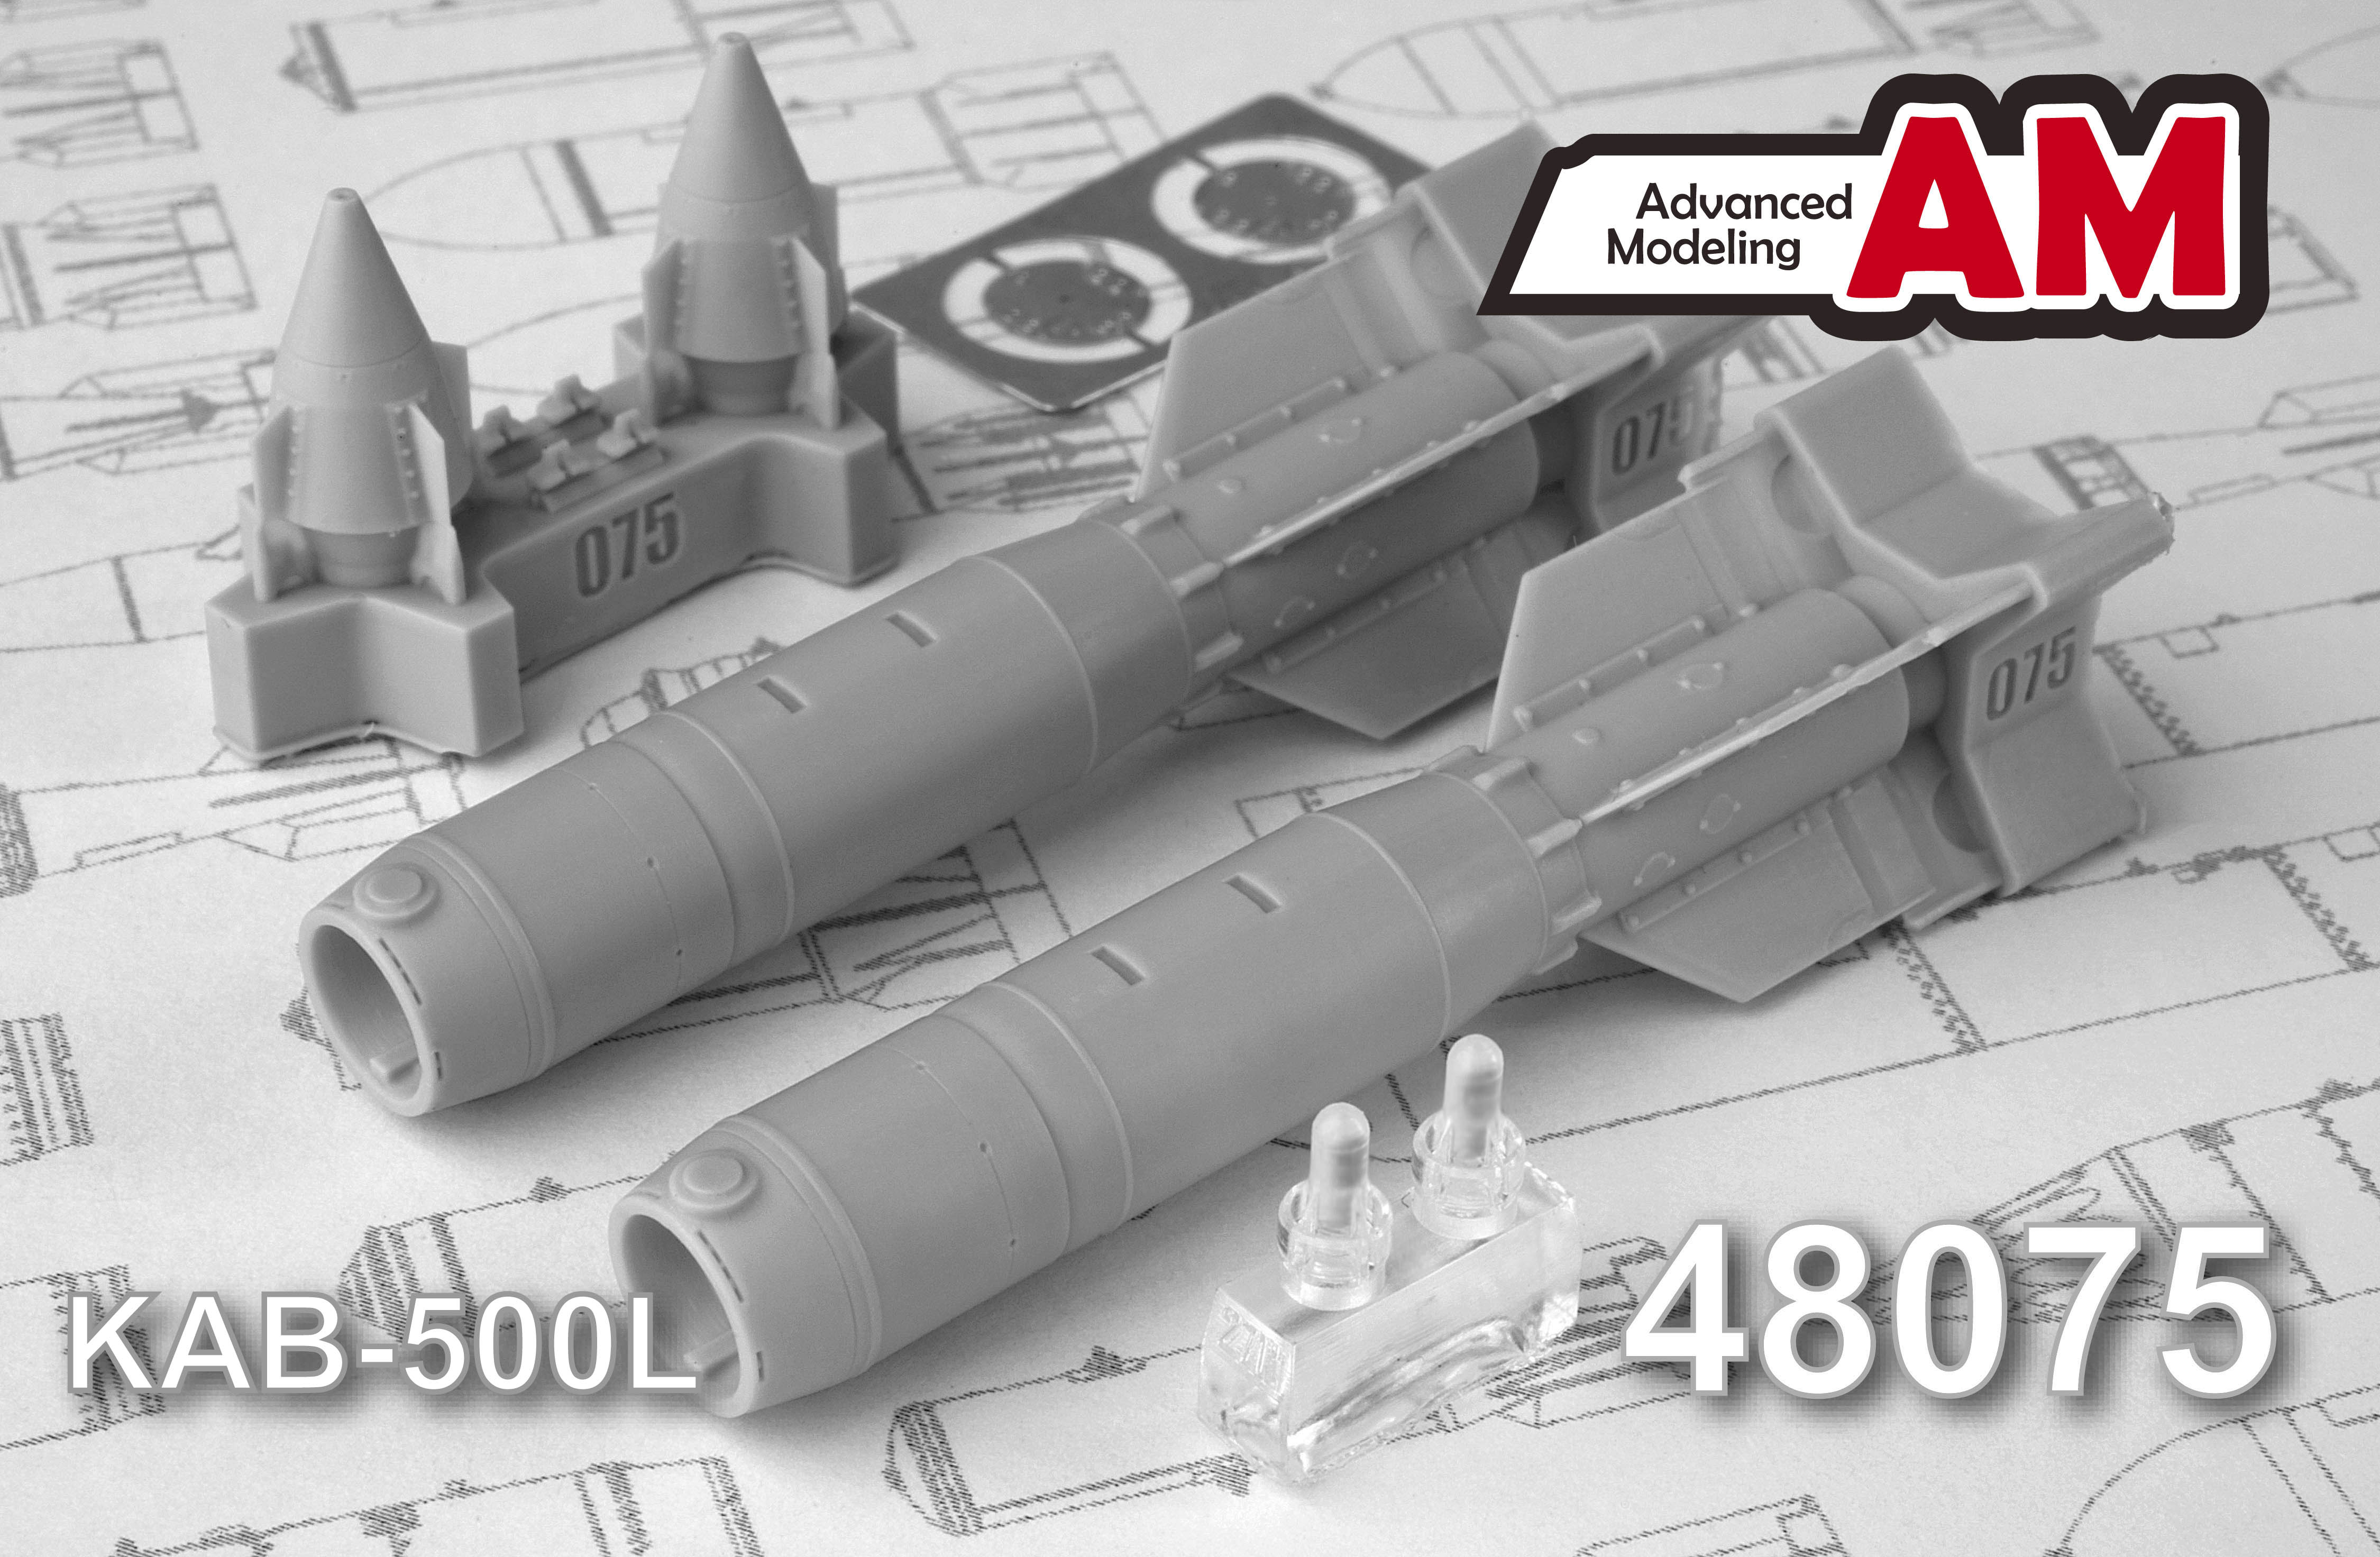 Additions (3D resin printing) 1/48 KAB-500L Corrective Air Bomb (Advanced Modeling) 